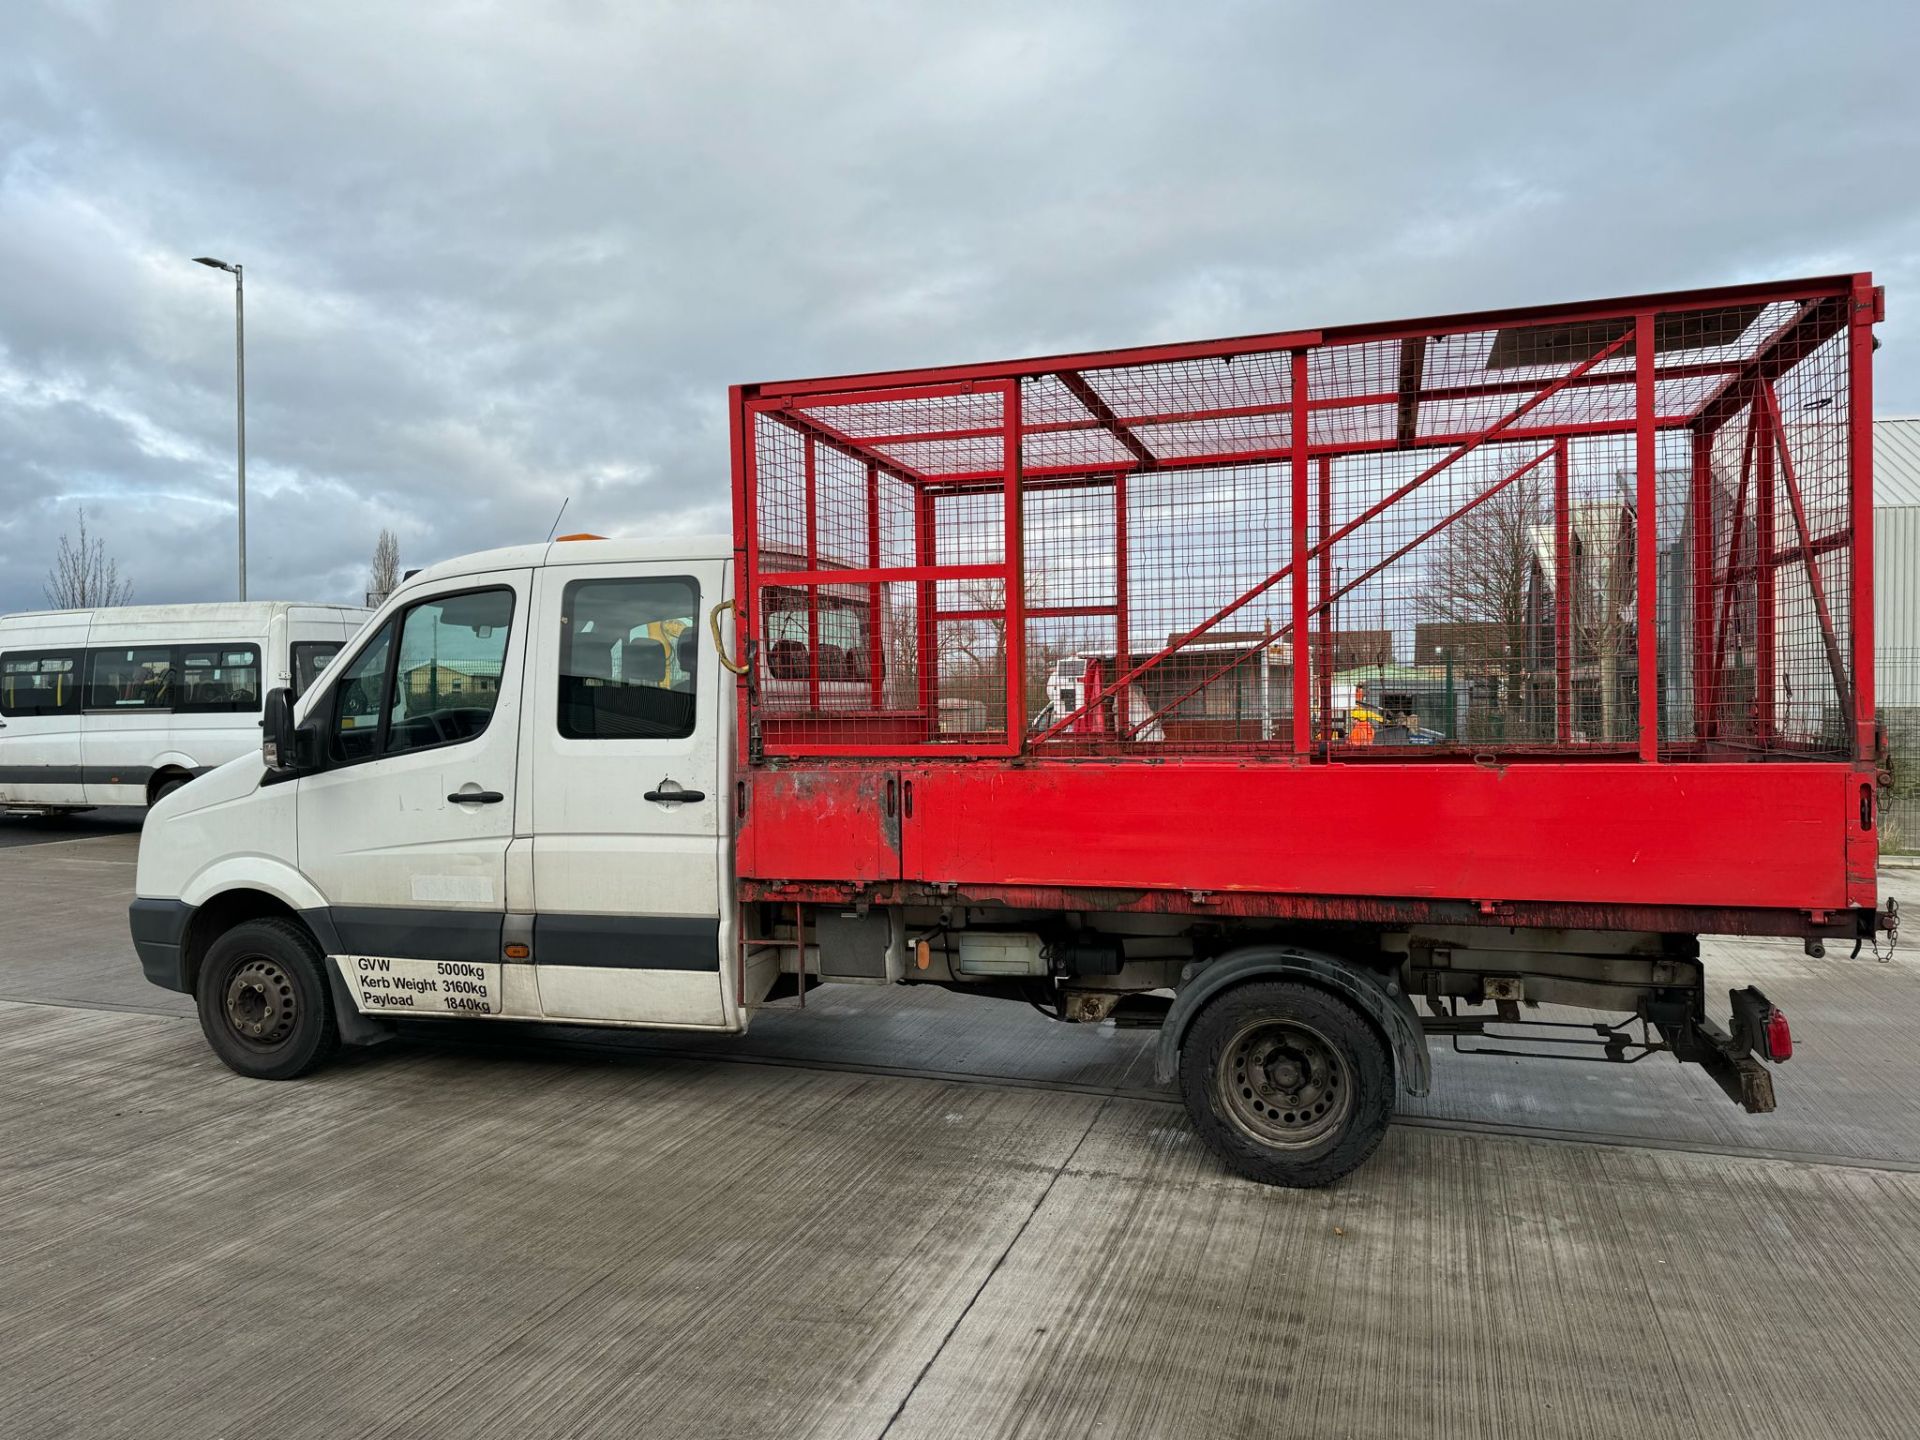 2013 - Volkswagen Crafter, Caged Tipper (Ex-Council Owned & Maintained)